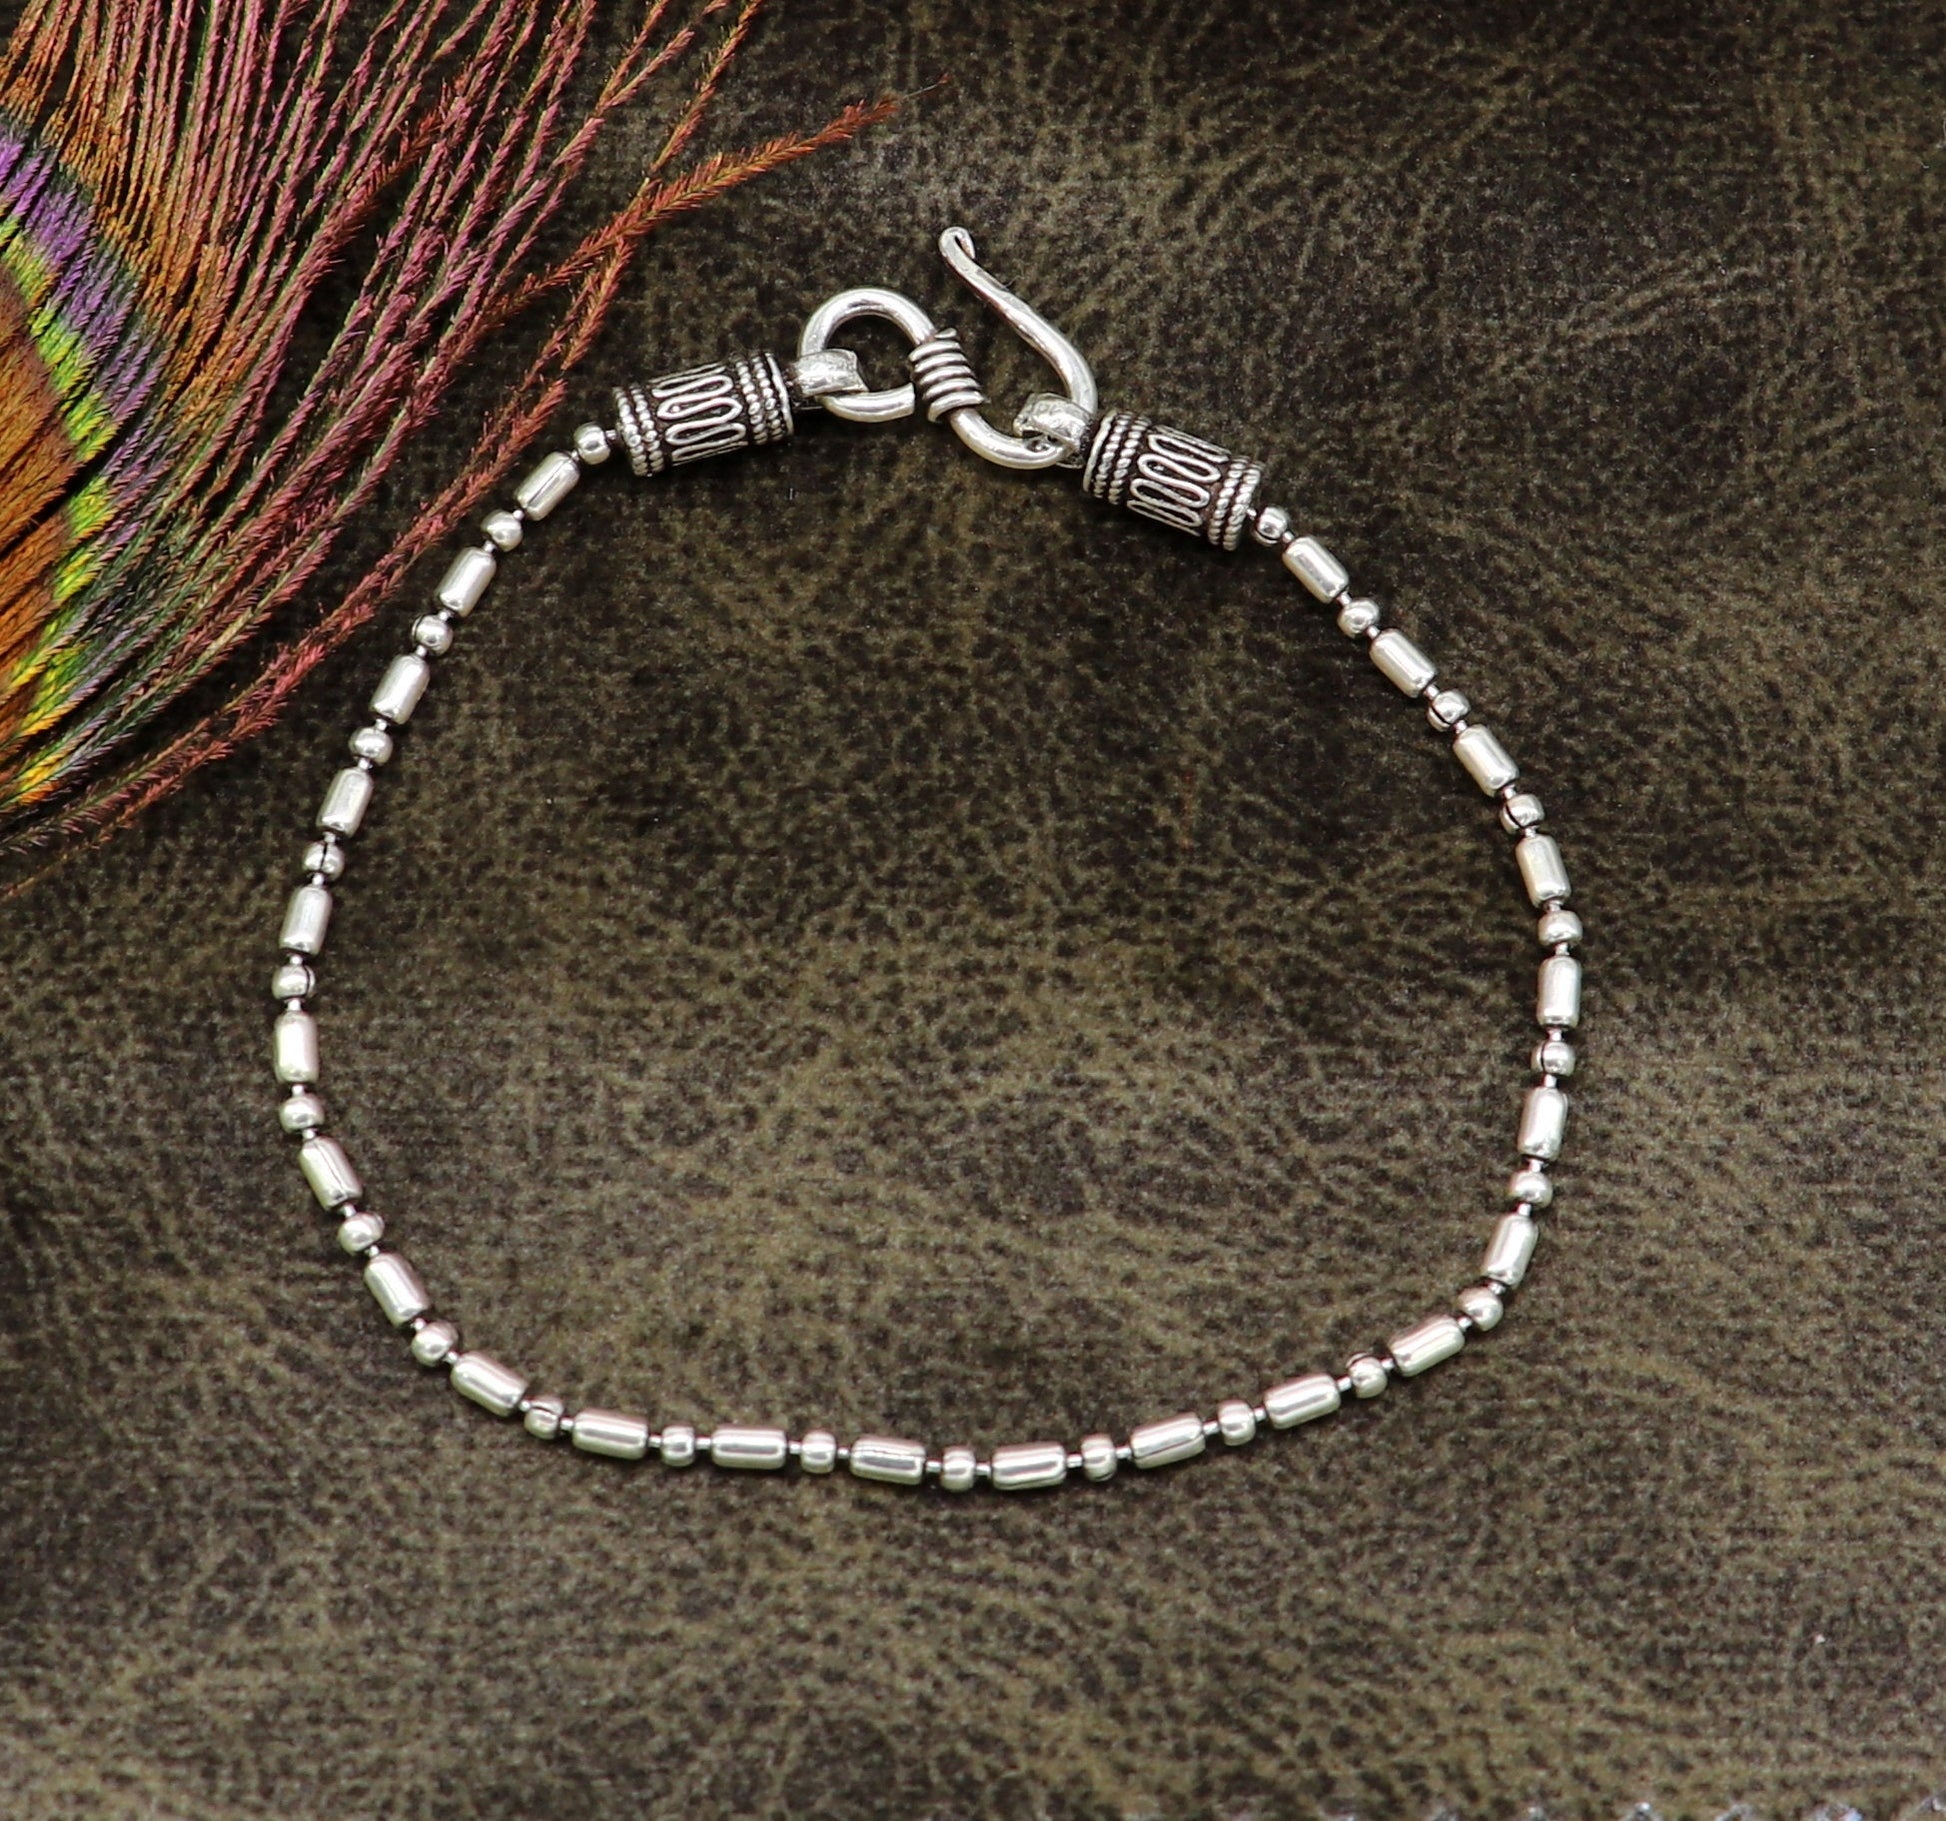 8" long 925 sterling silver customized design beaded bracelet, excellent girl's bracelet best gifting jewelry stylish unique jewelry nsbr258 - TRIBAL ORNAMENTS